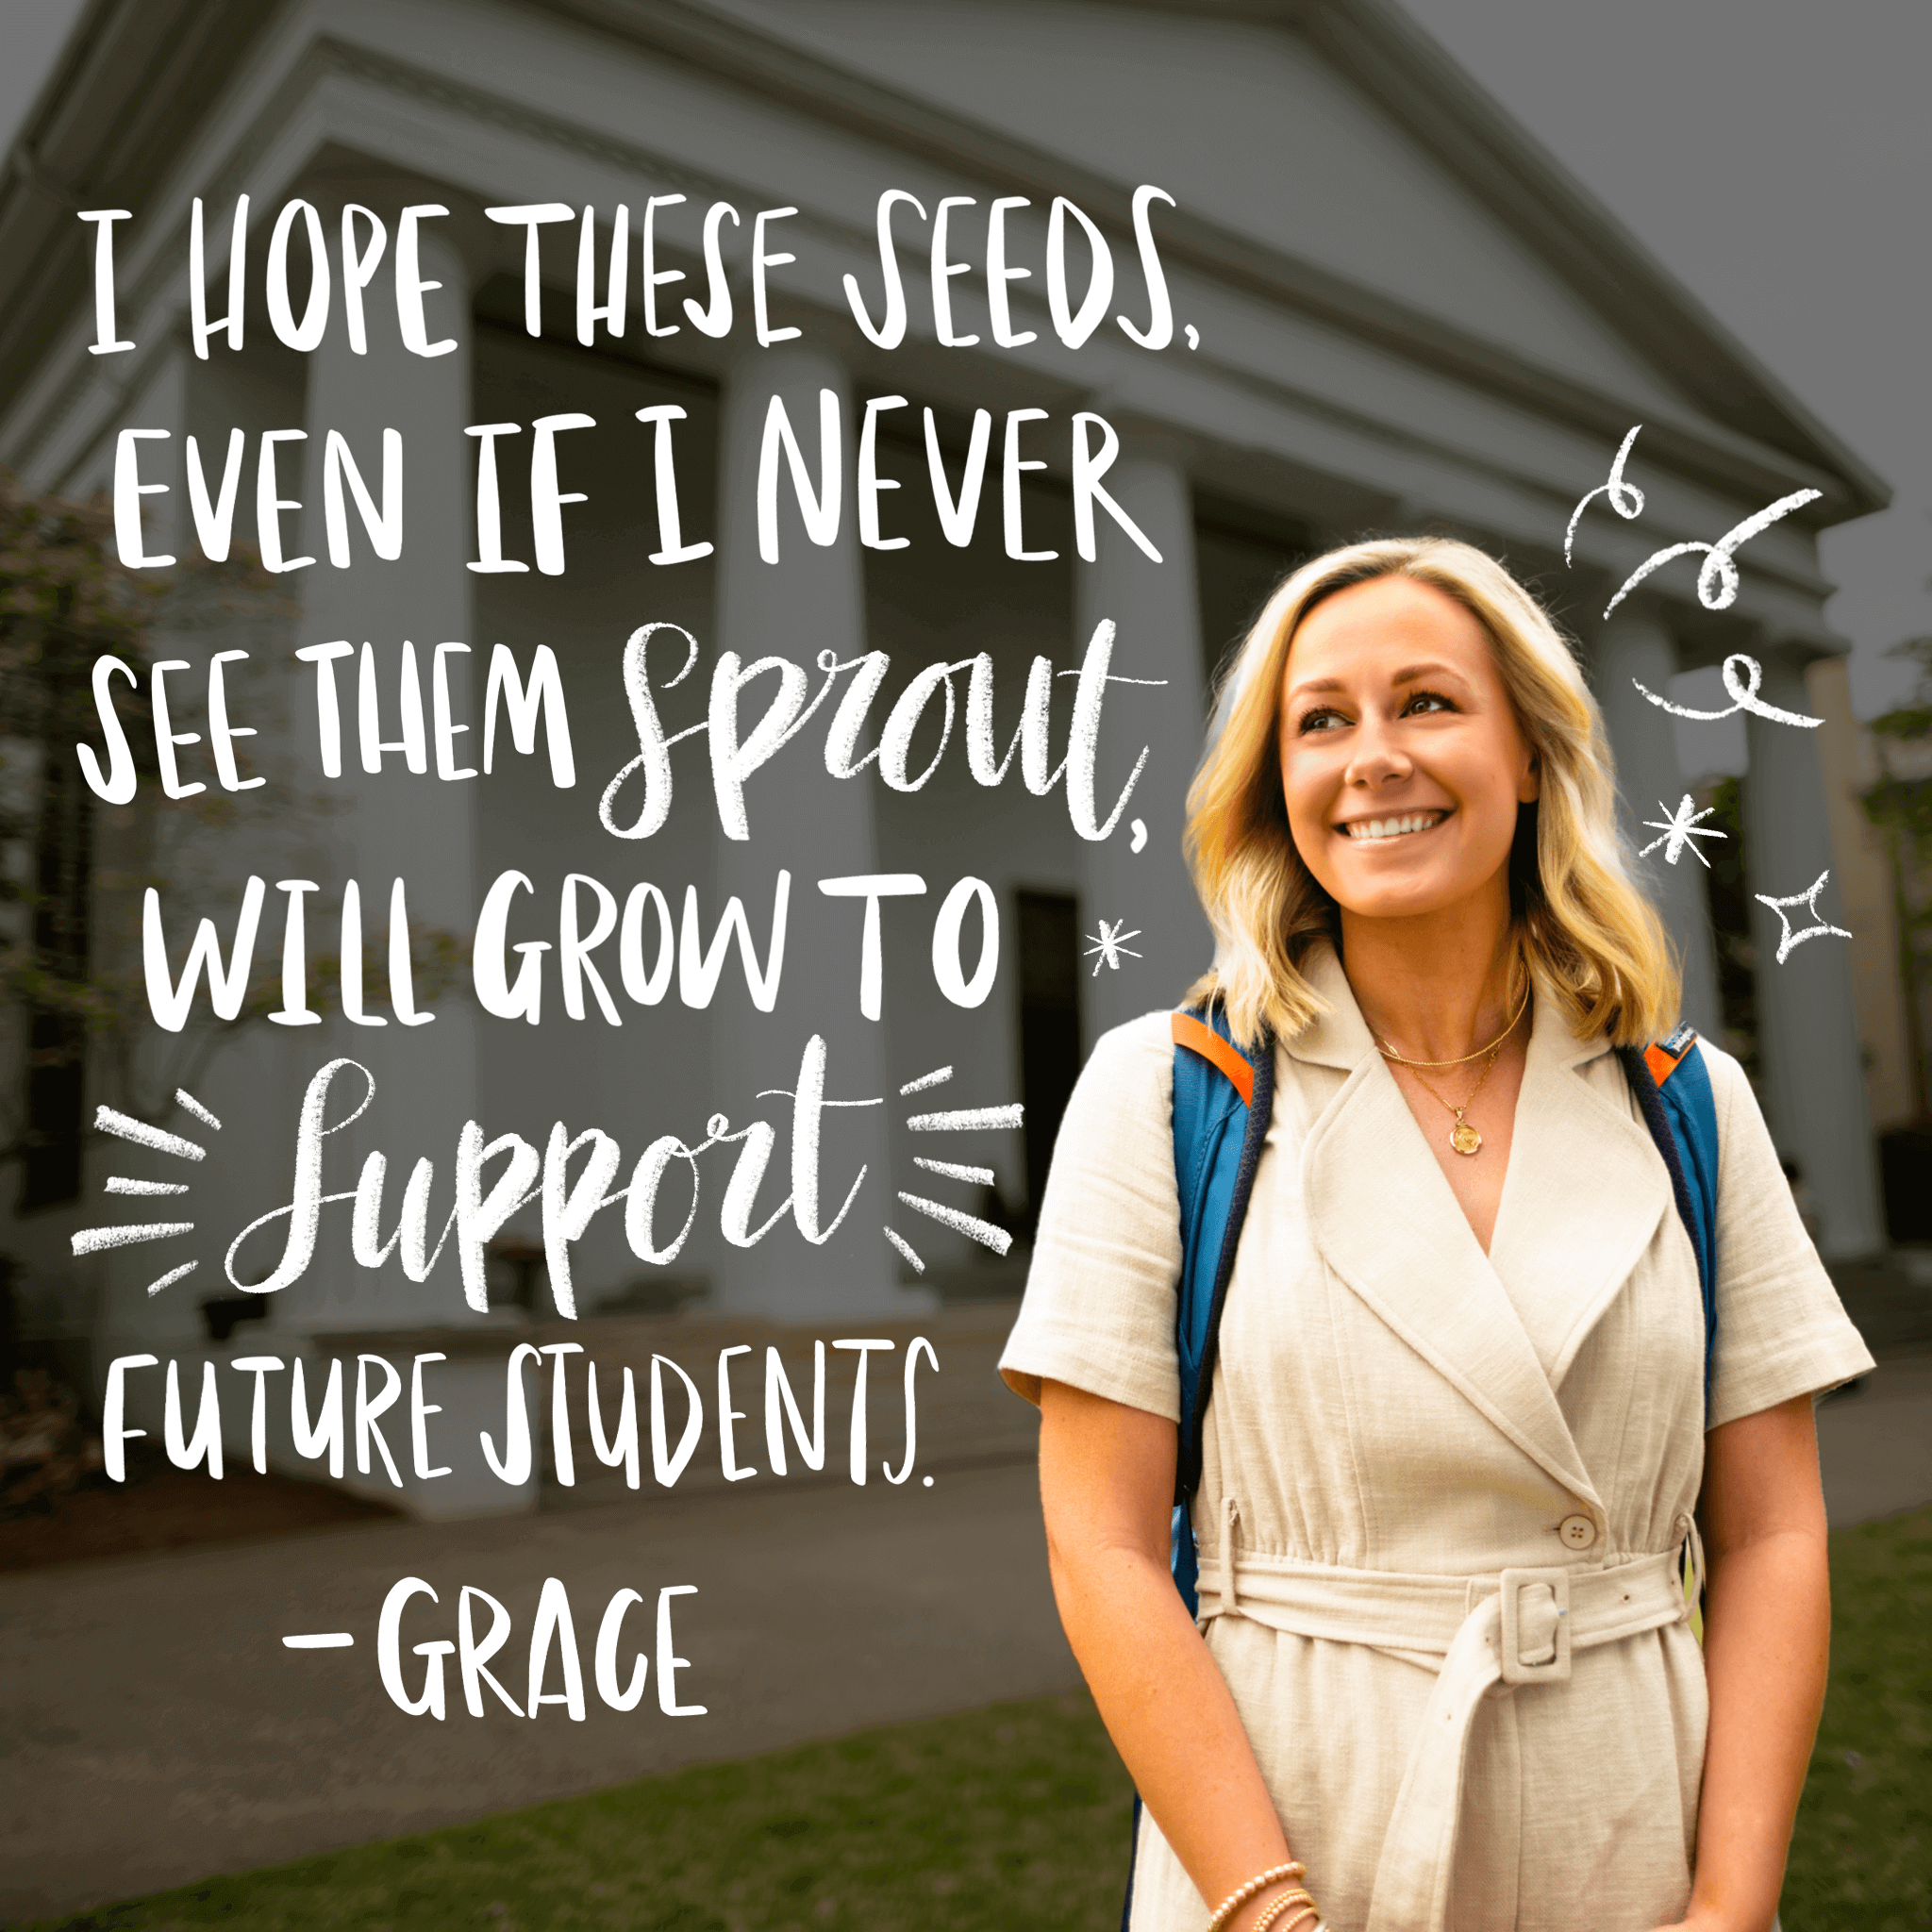 I hope these seeds, even if I never see them spout, will grow to support future students. - Grace